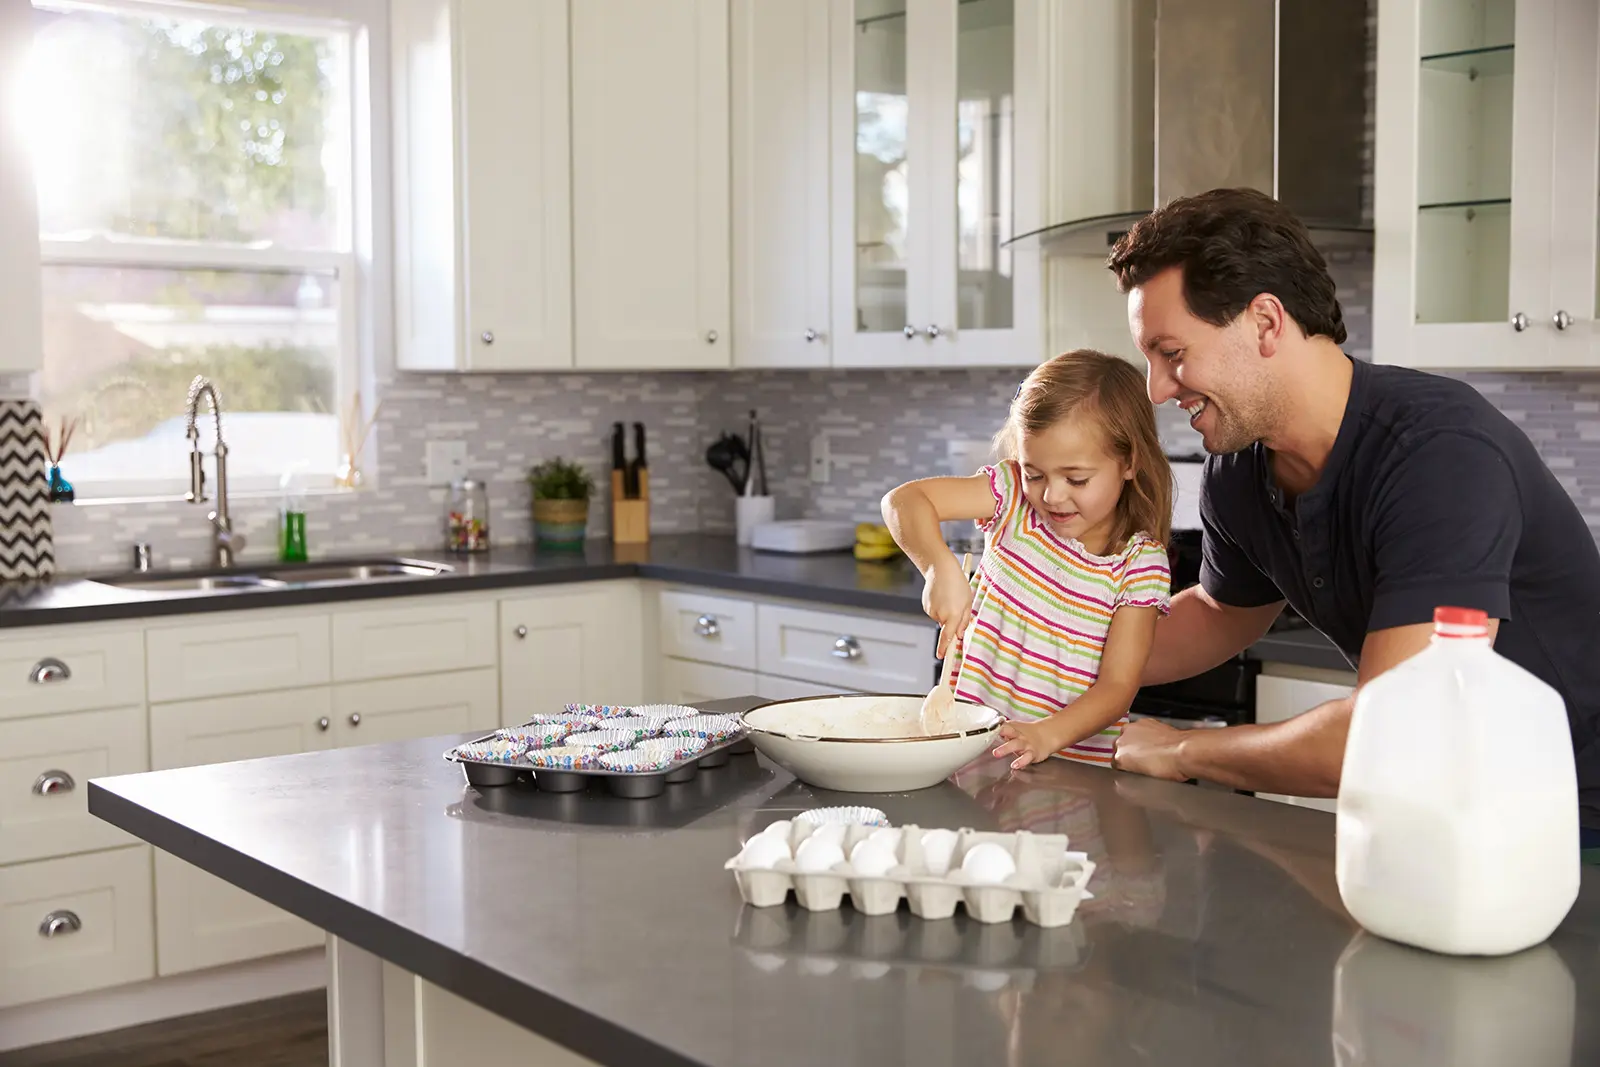 Child and parent making cupcakes on a kitchen counter